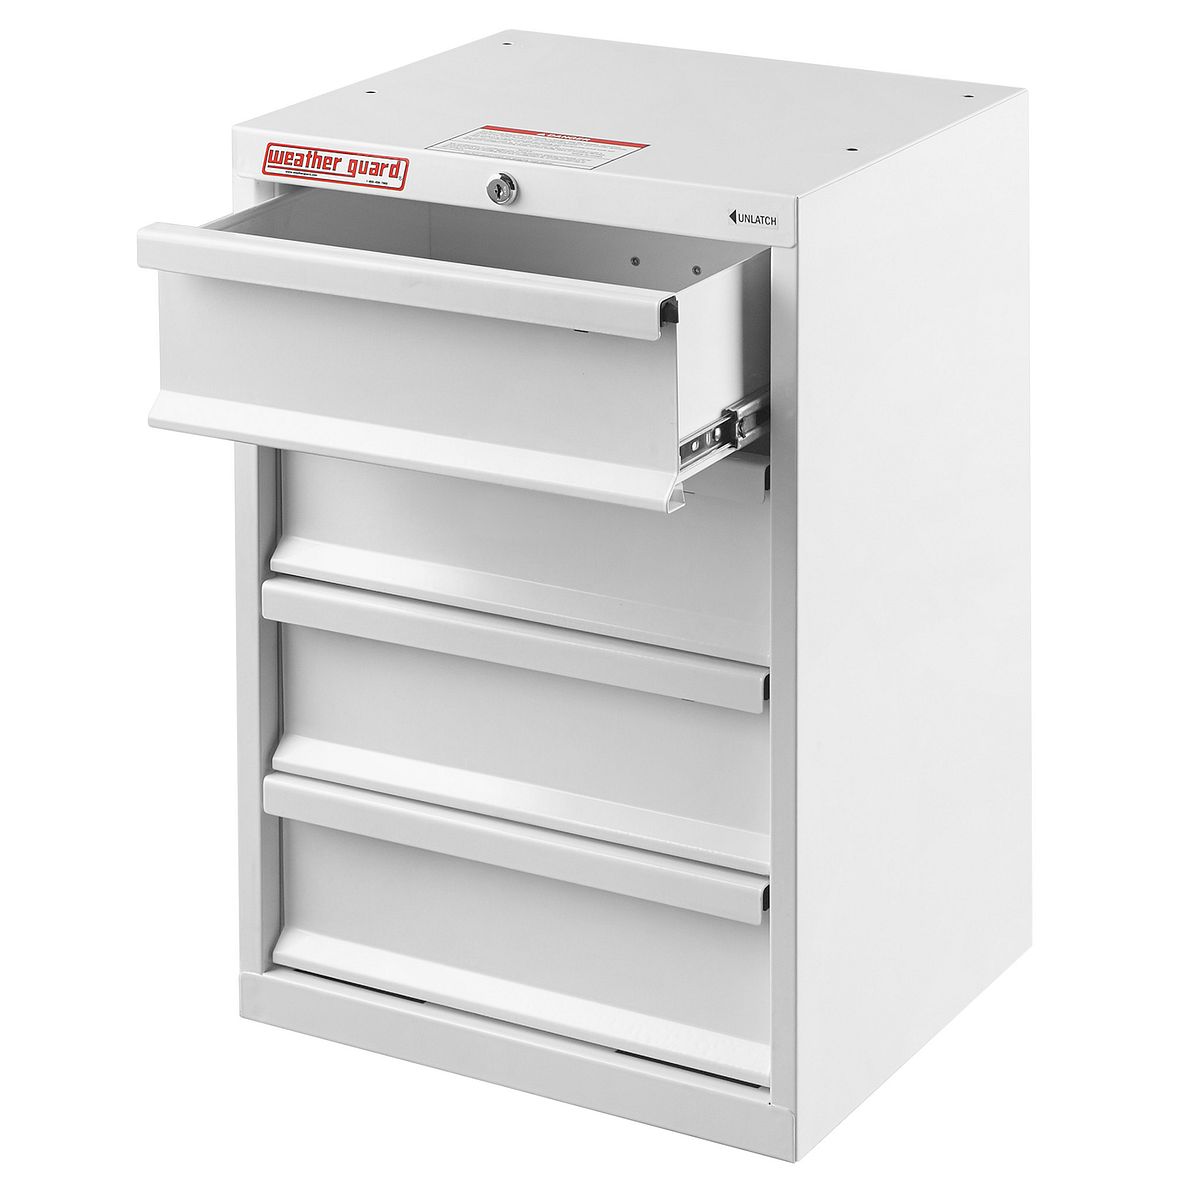 Cabinet - 4 Drawer - 24 in. x 16 in. x 14 in. Image